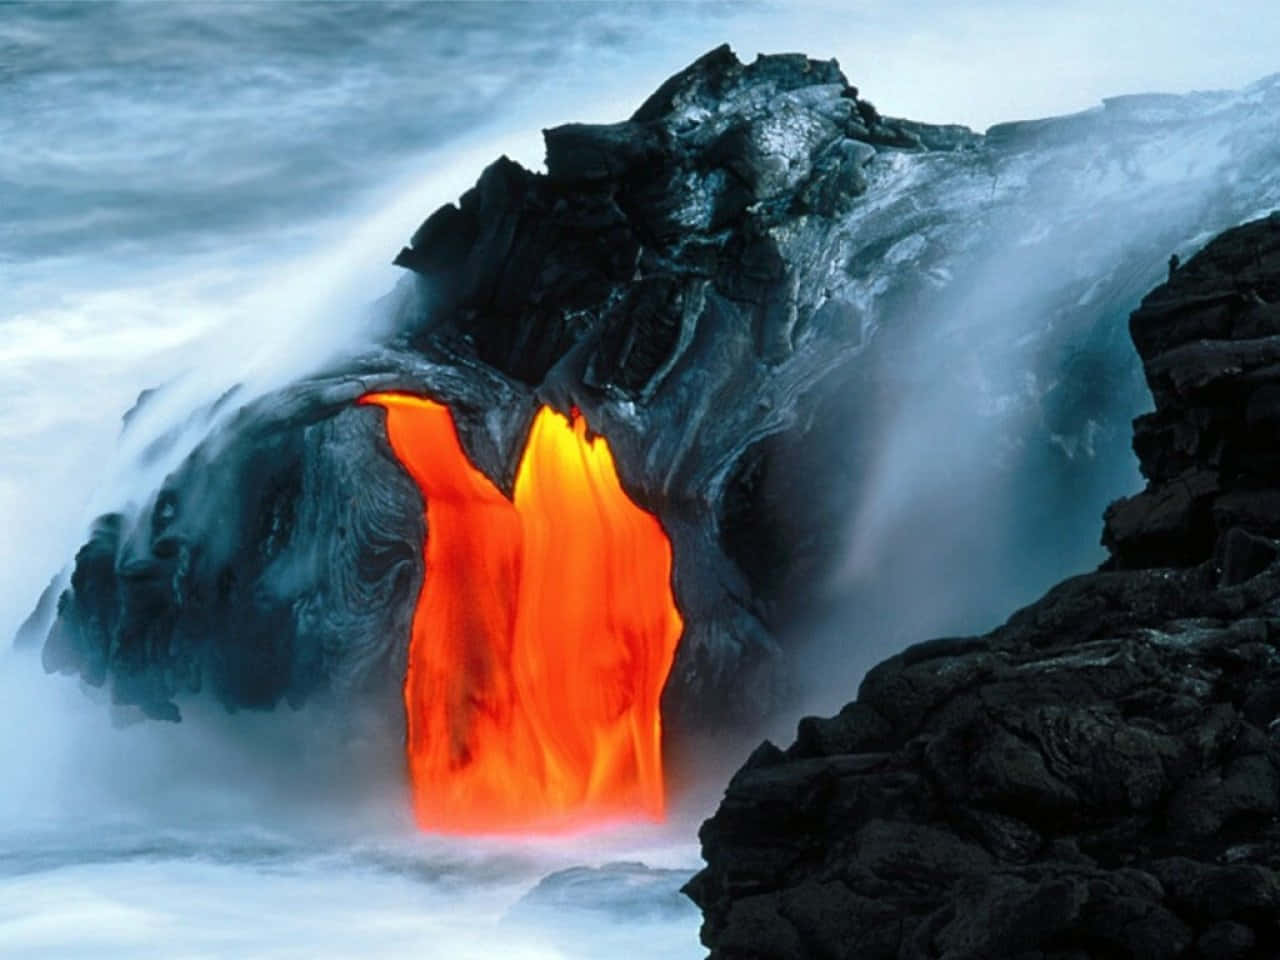 Volcano spewing toxic ash and smoke.